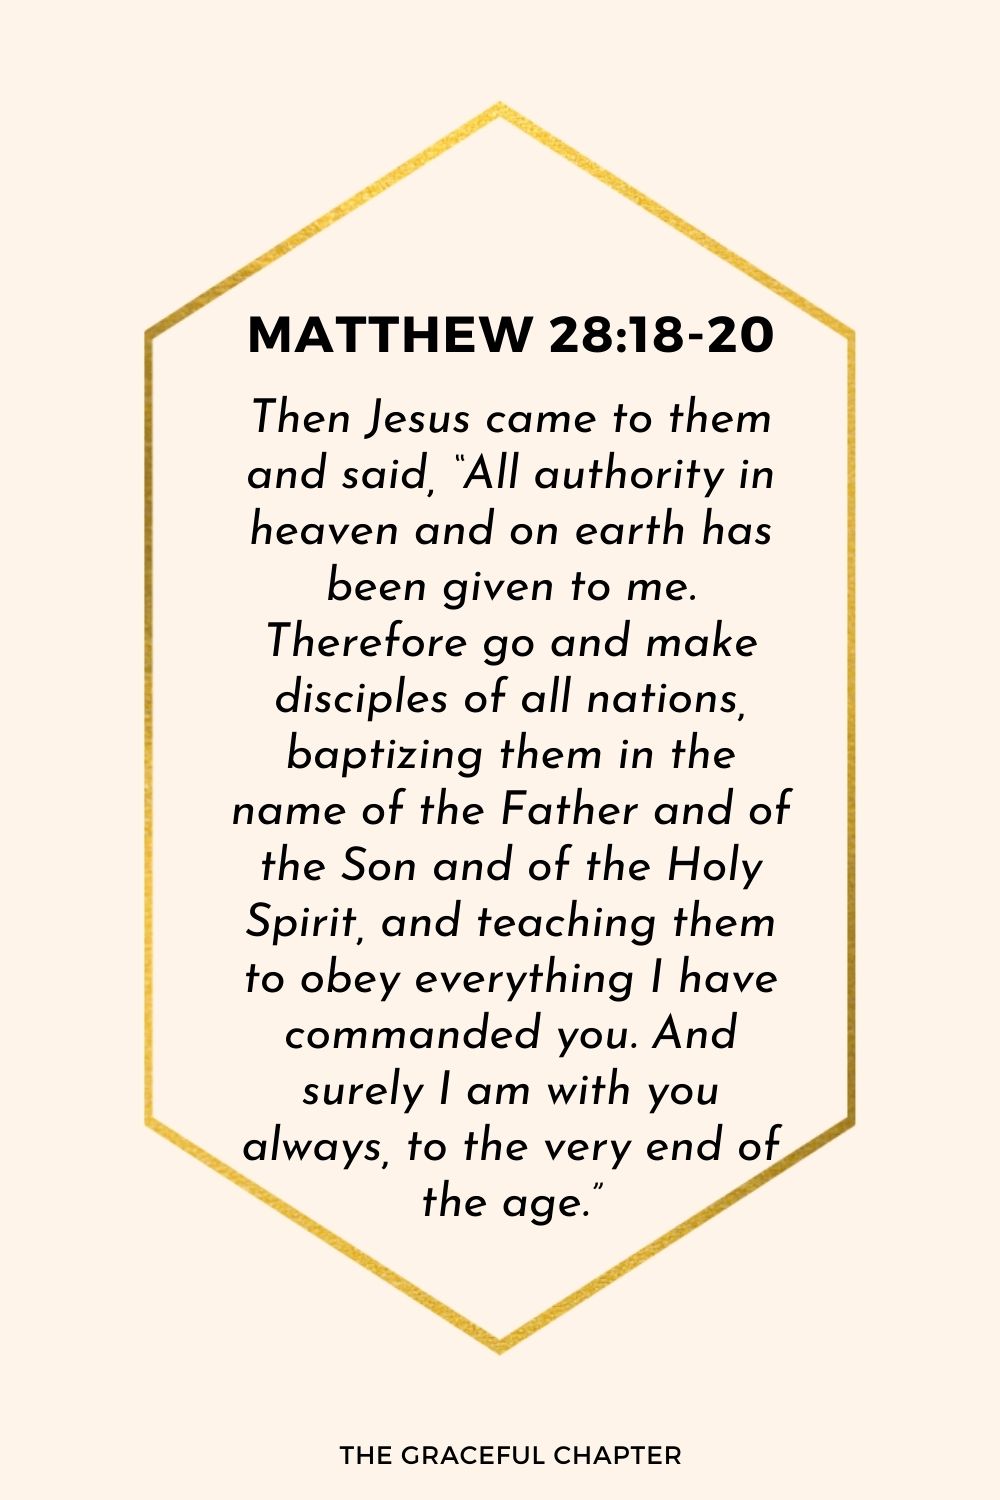 Then Jesus came to them and said, “All authority in heaven and on earth has been given to me. Therefore go and make disciples of all nations, baptizing them in the name of the Father and of the Son and of the Holy Spirit, and teaching them to obey everything I have commanded you. And surely I am with you always, to the very end of the age.”